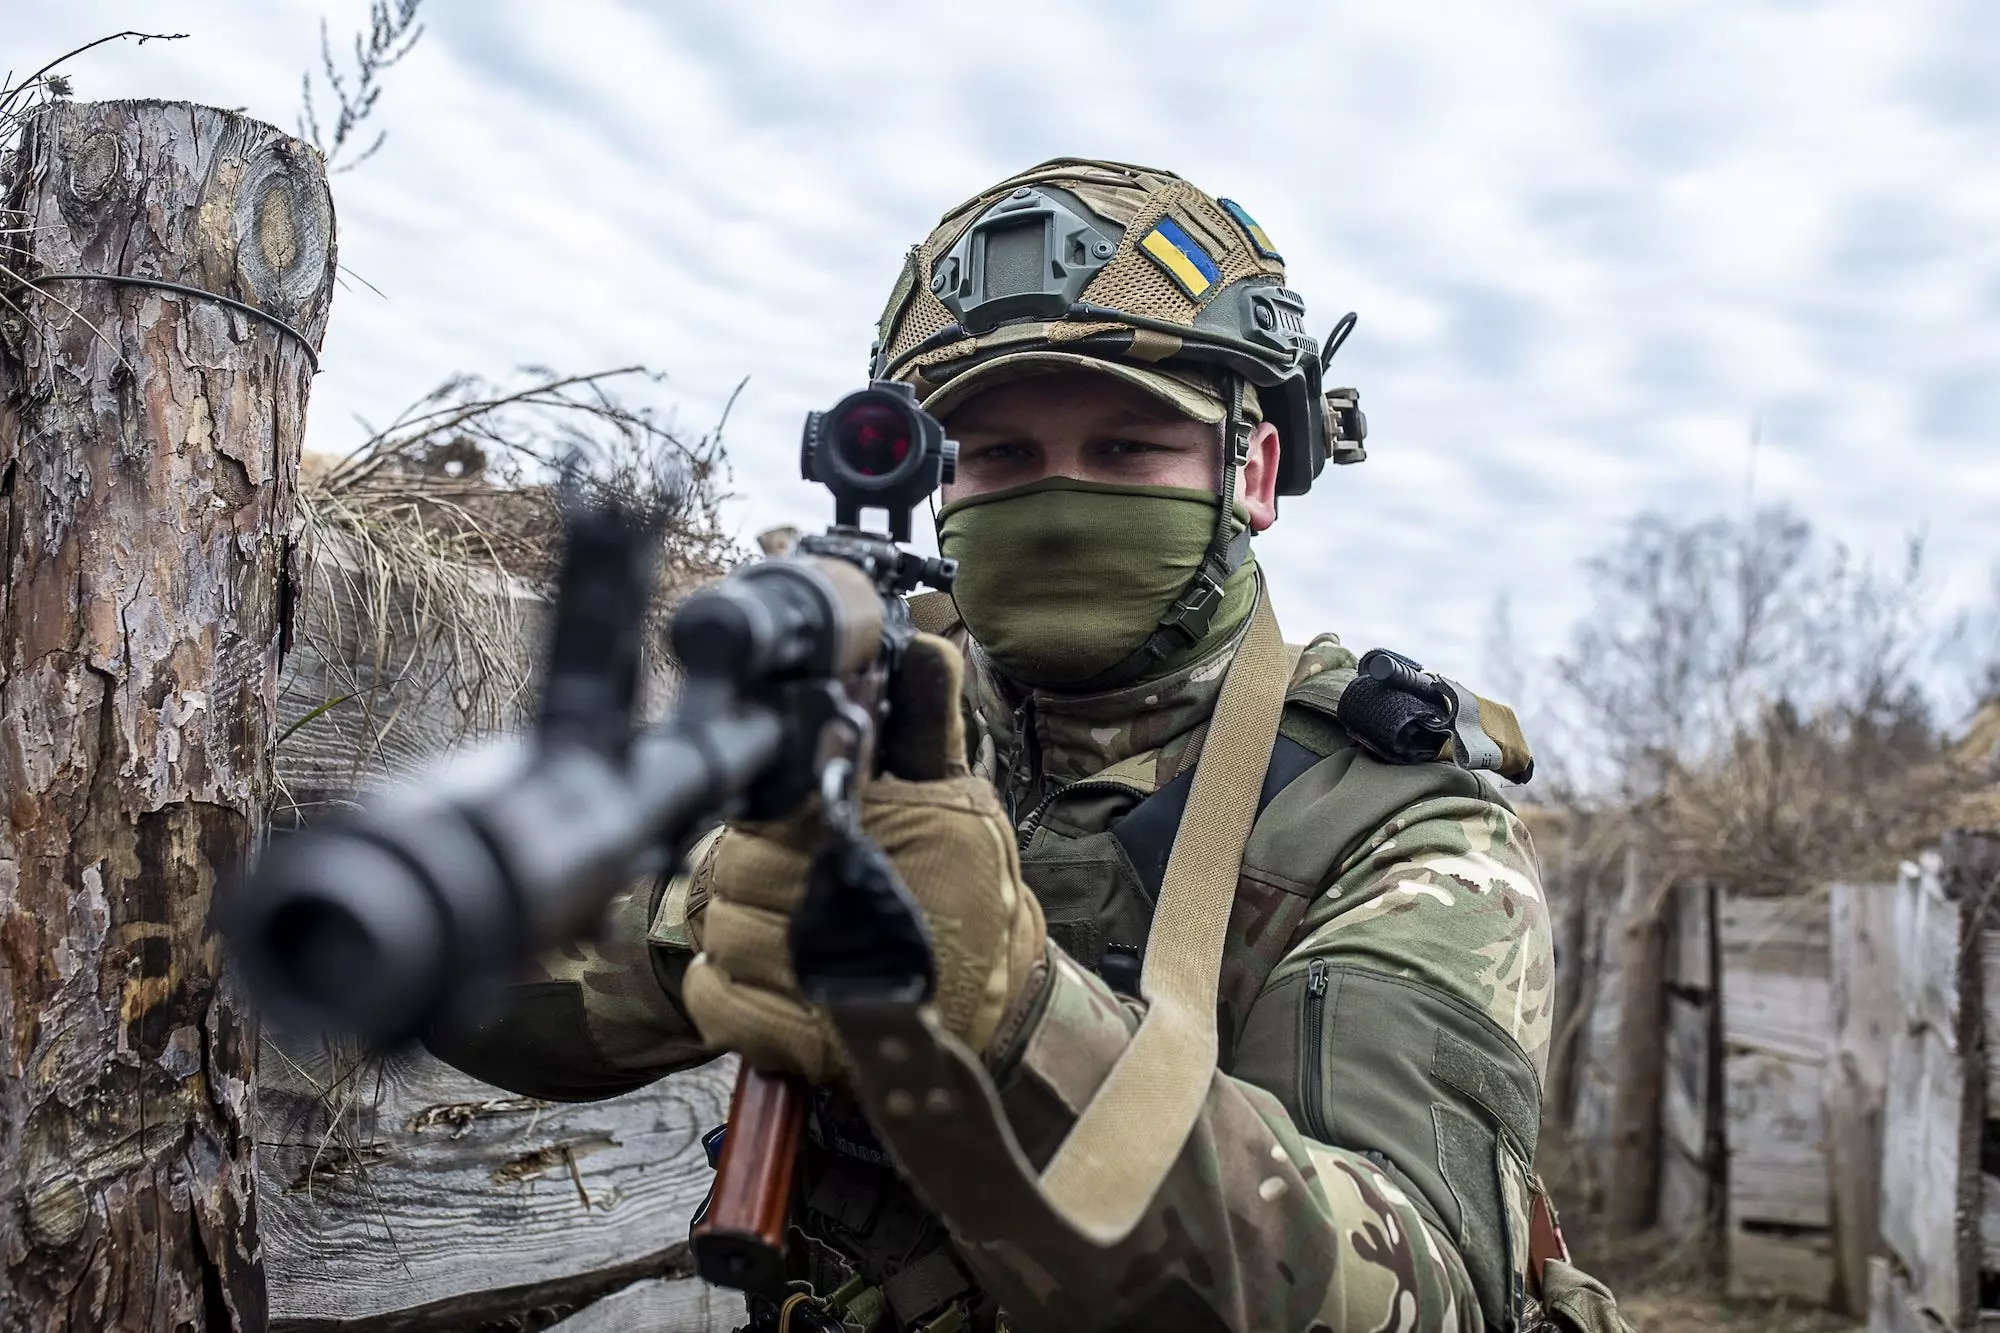 A member of 120th Independent Brigade of the Territorial Defense Forces of Ukraine takes part in training exercises on March 16.